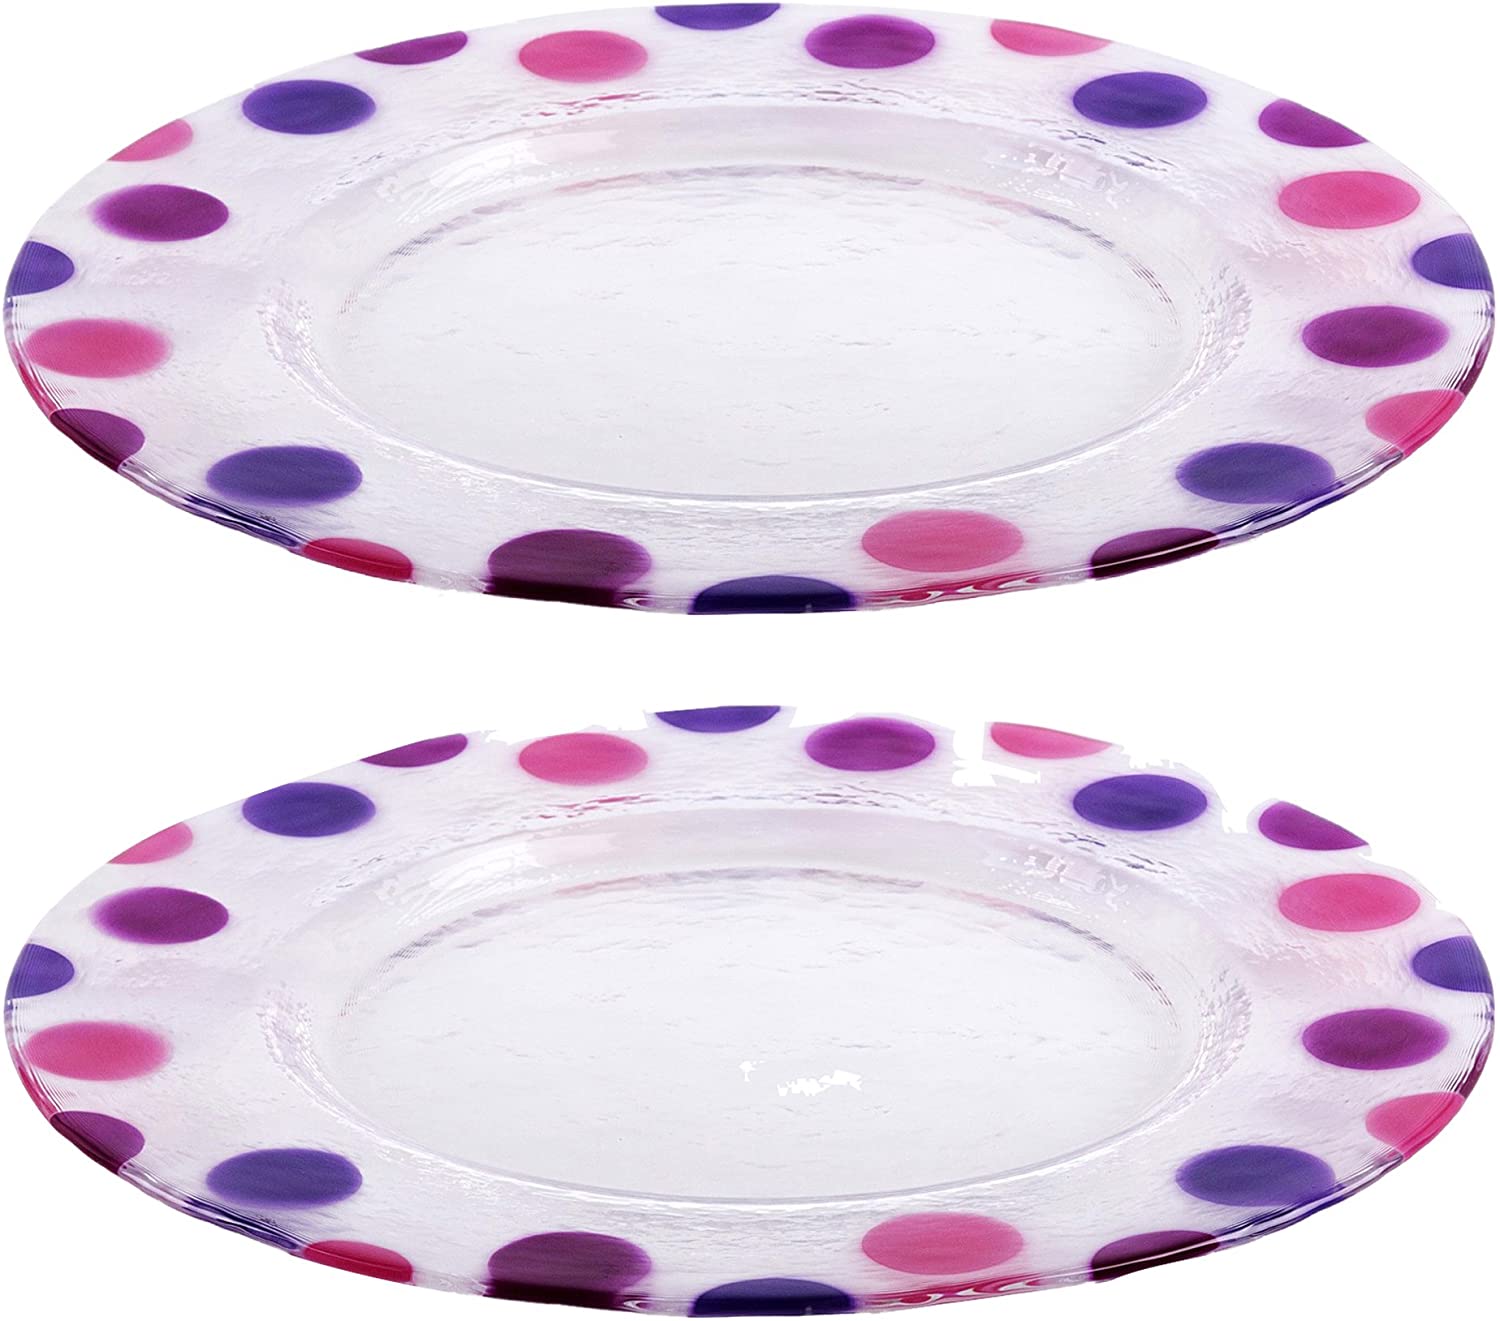 Bohemia Cristal Play of colors Lime Soda Glass Plate Set of 2 Approx. Diameter 320 mm with Polka Dots